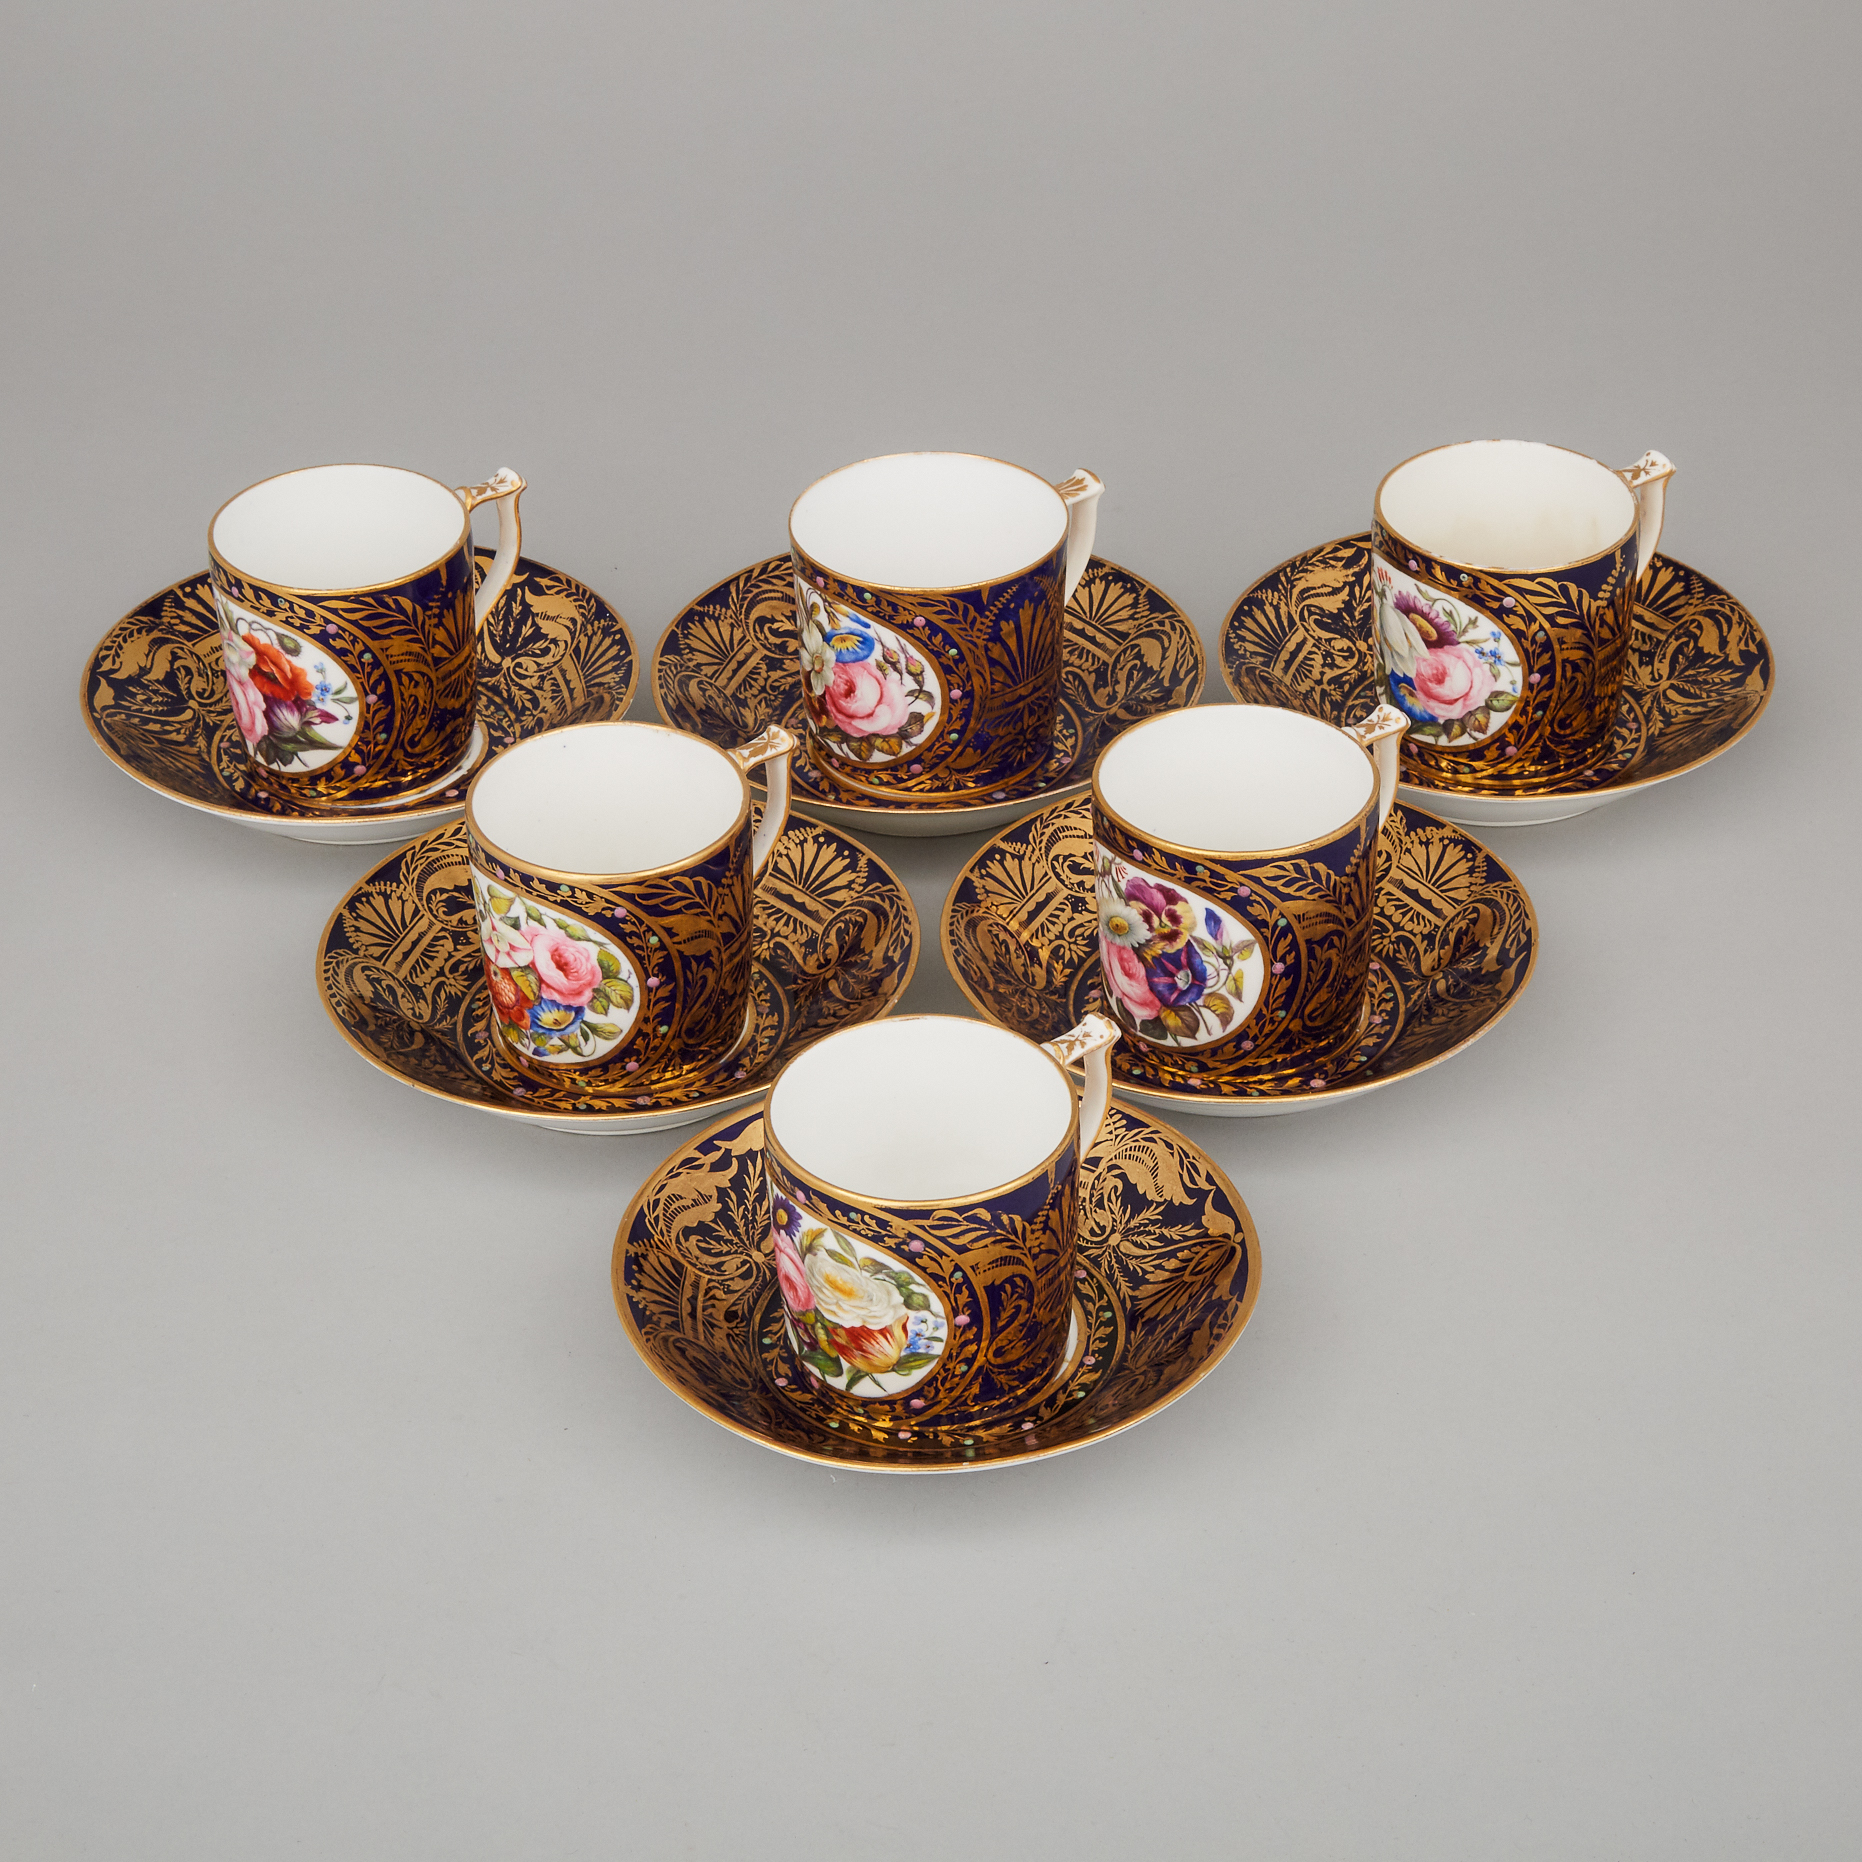 Six Stevenson & Hancock Derby 'Jeweled' Cups and Saucers, late 19th century